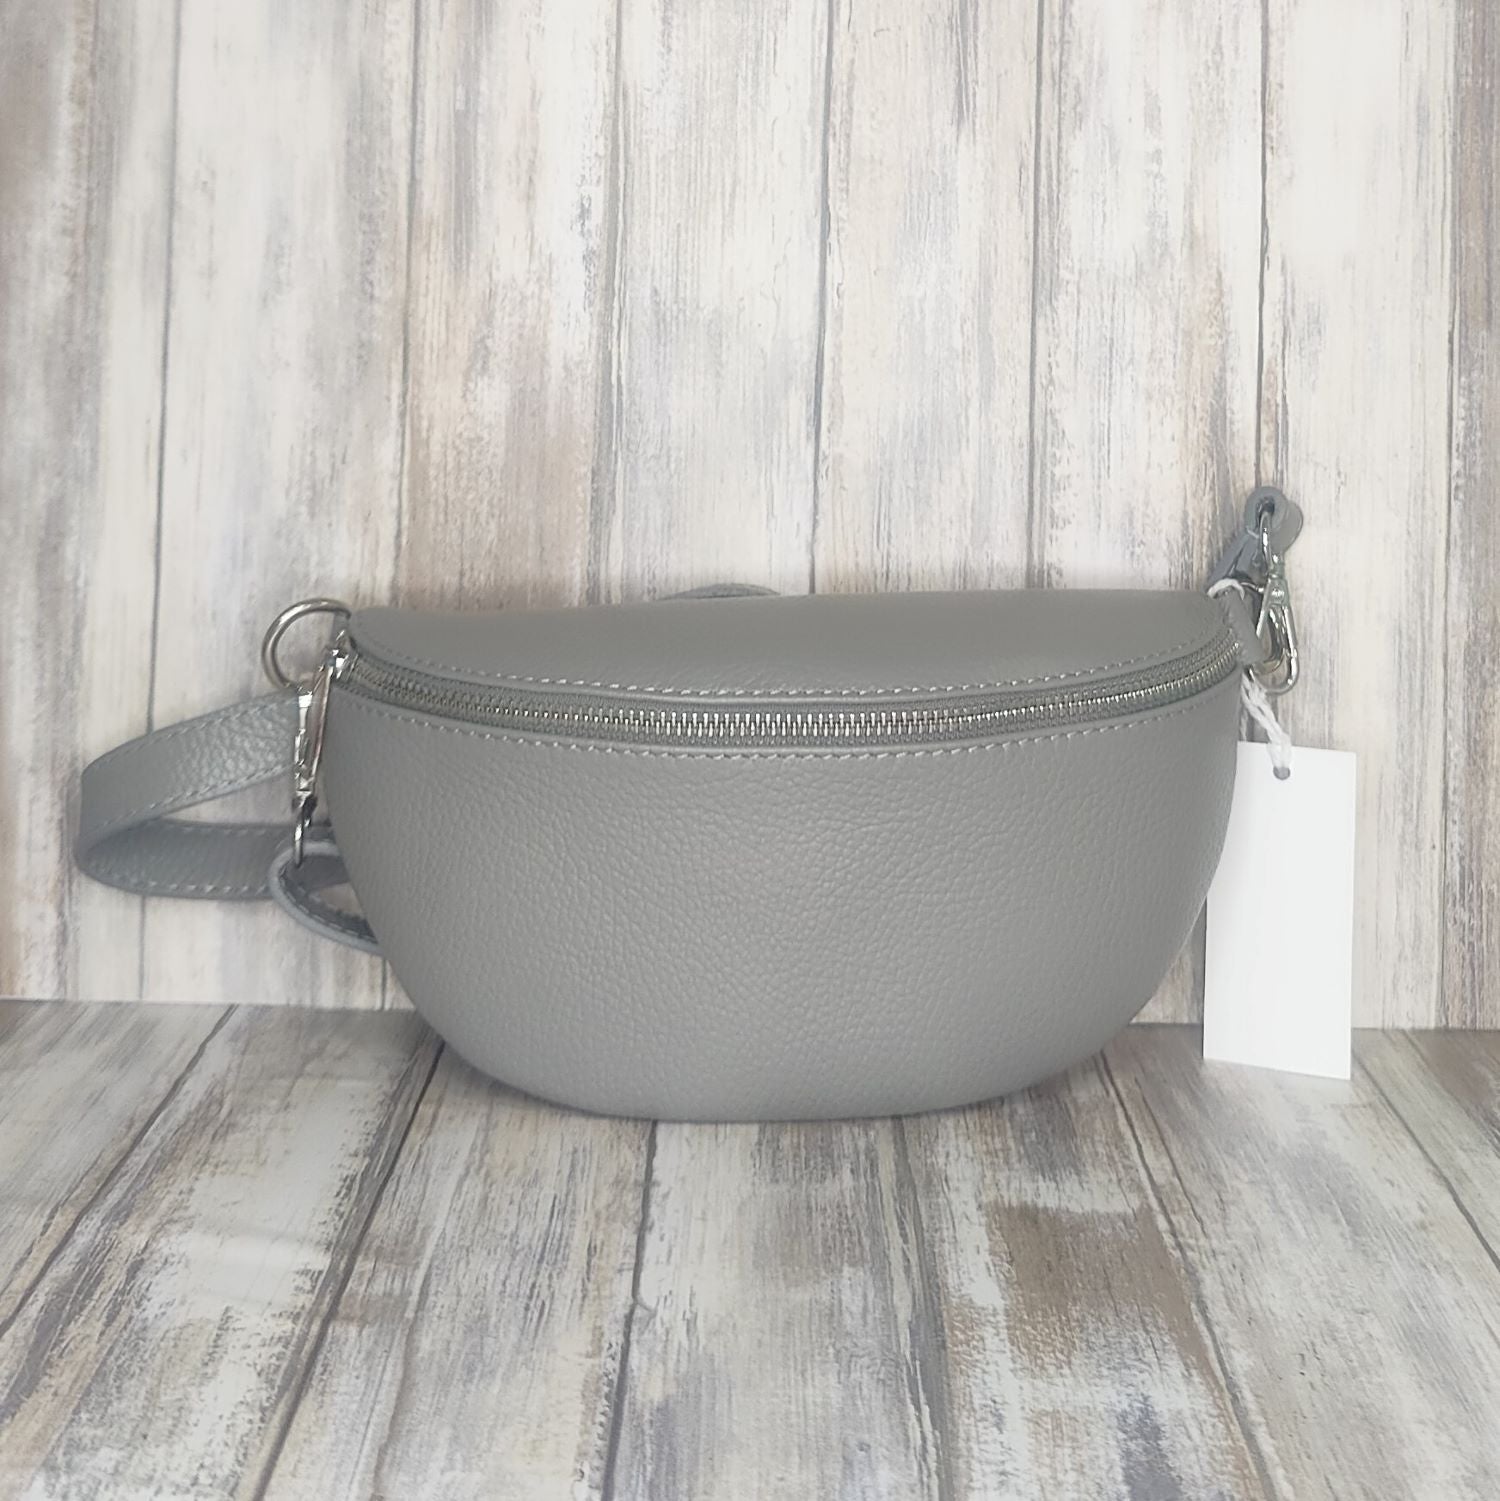 Made with soft  Italian leather, our Sling Bag/Bum Bag is the perfect combination of chic and practical. Enjoy easy access to your essentials when you're on the go, and elevate your look with confidence!  Top Zip Closure  Internal pocket  Silver Hardware  L:12cm x W:26cm x D:9cm